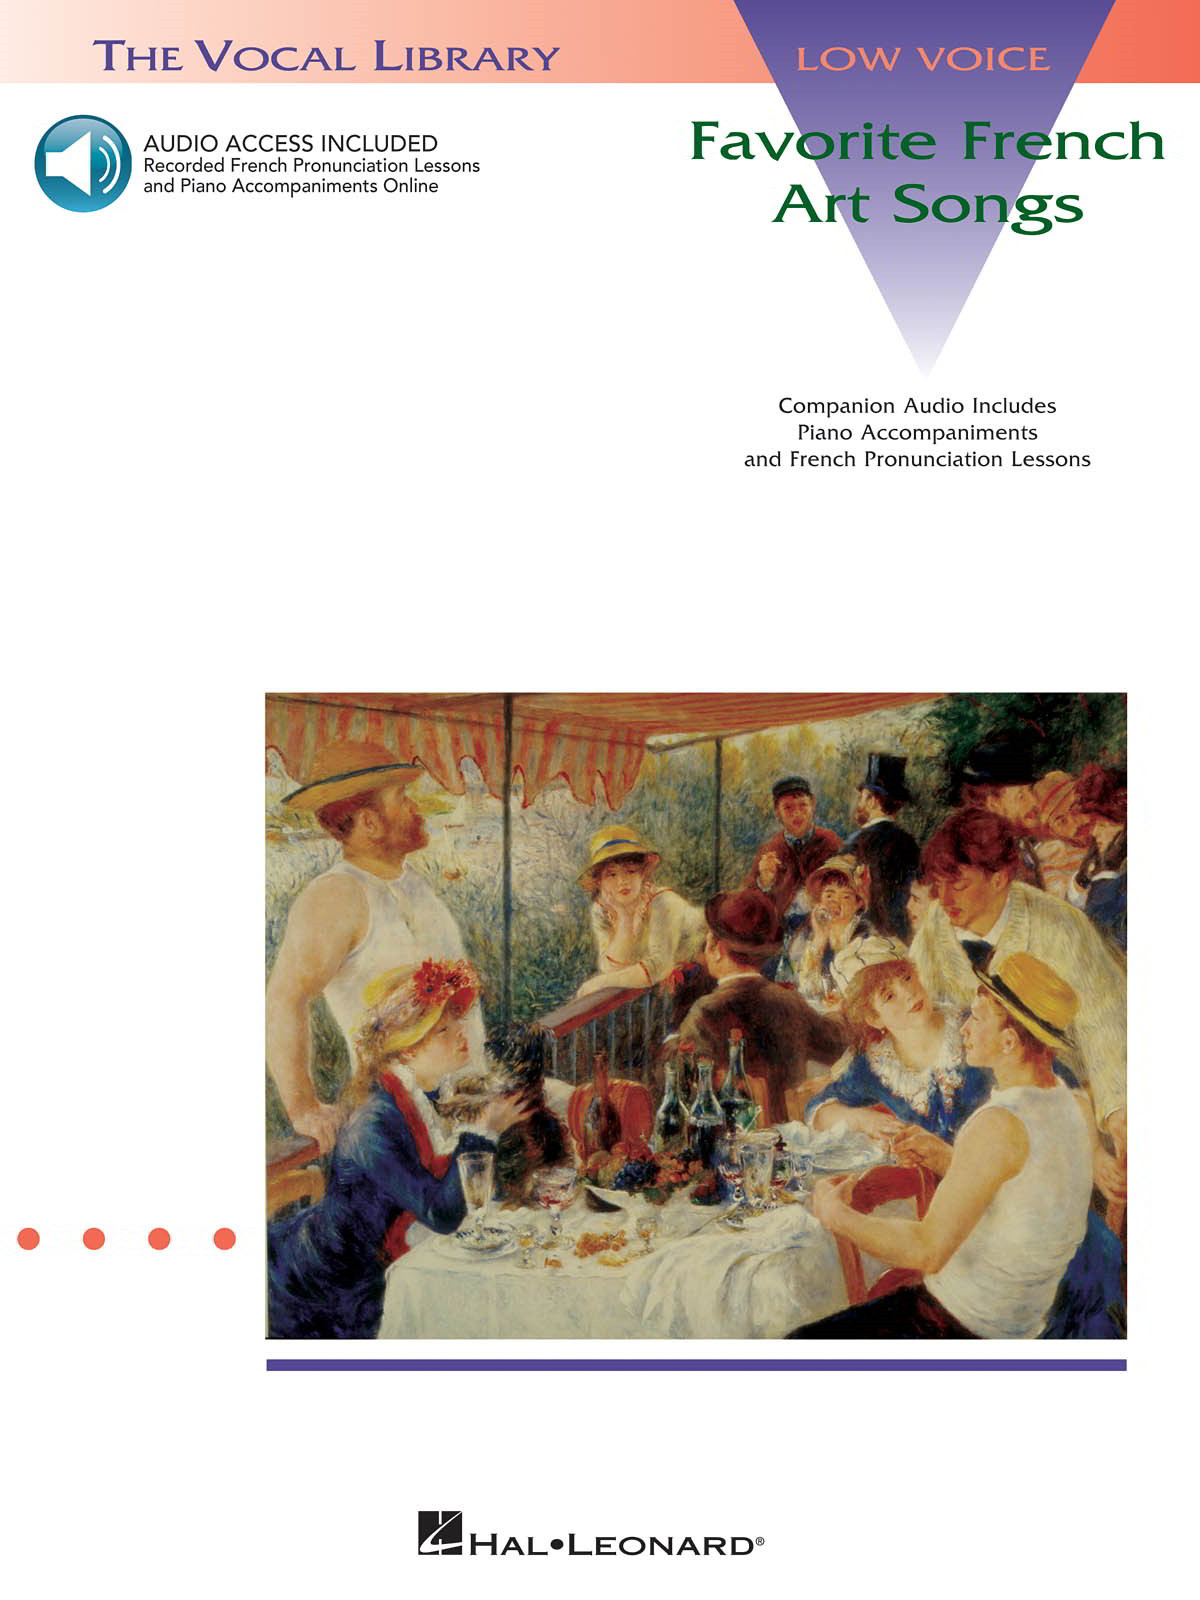 Favorite French Art Songs - Low Voice published by Hal Leonard (Book/Online Audio)